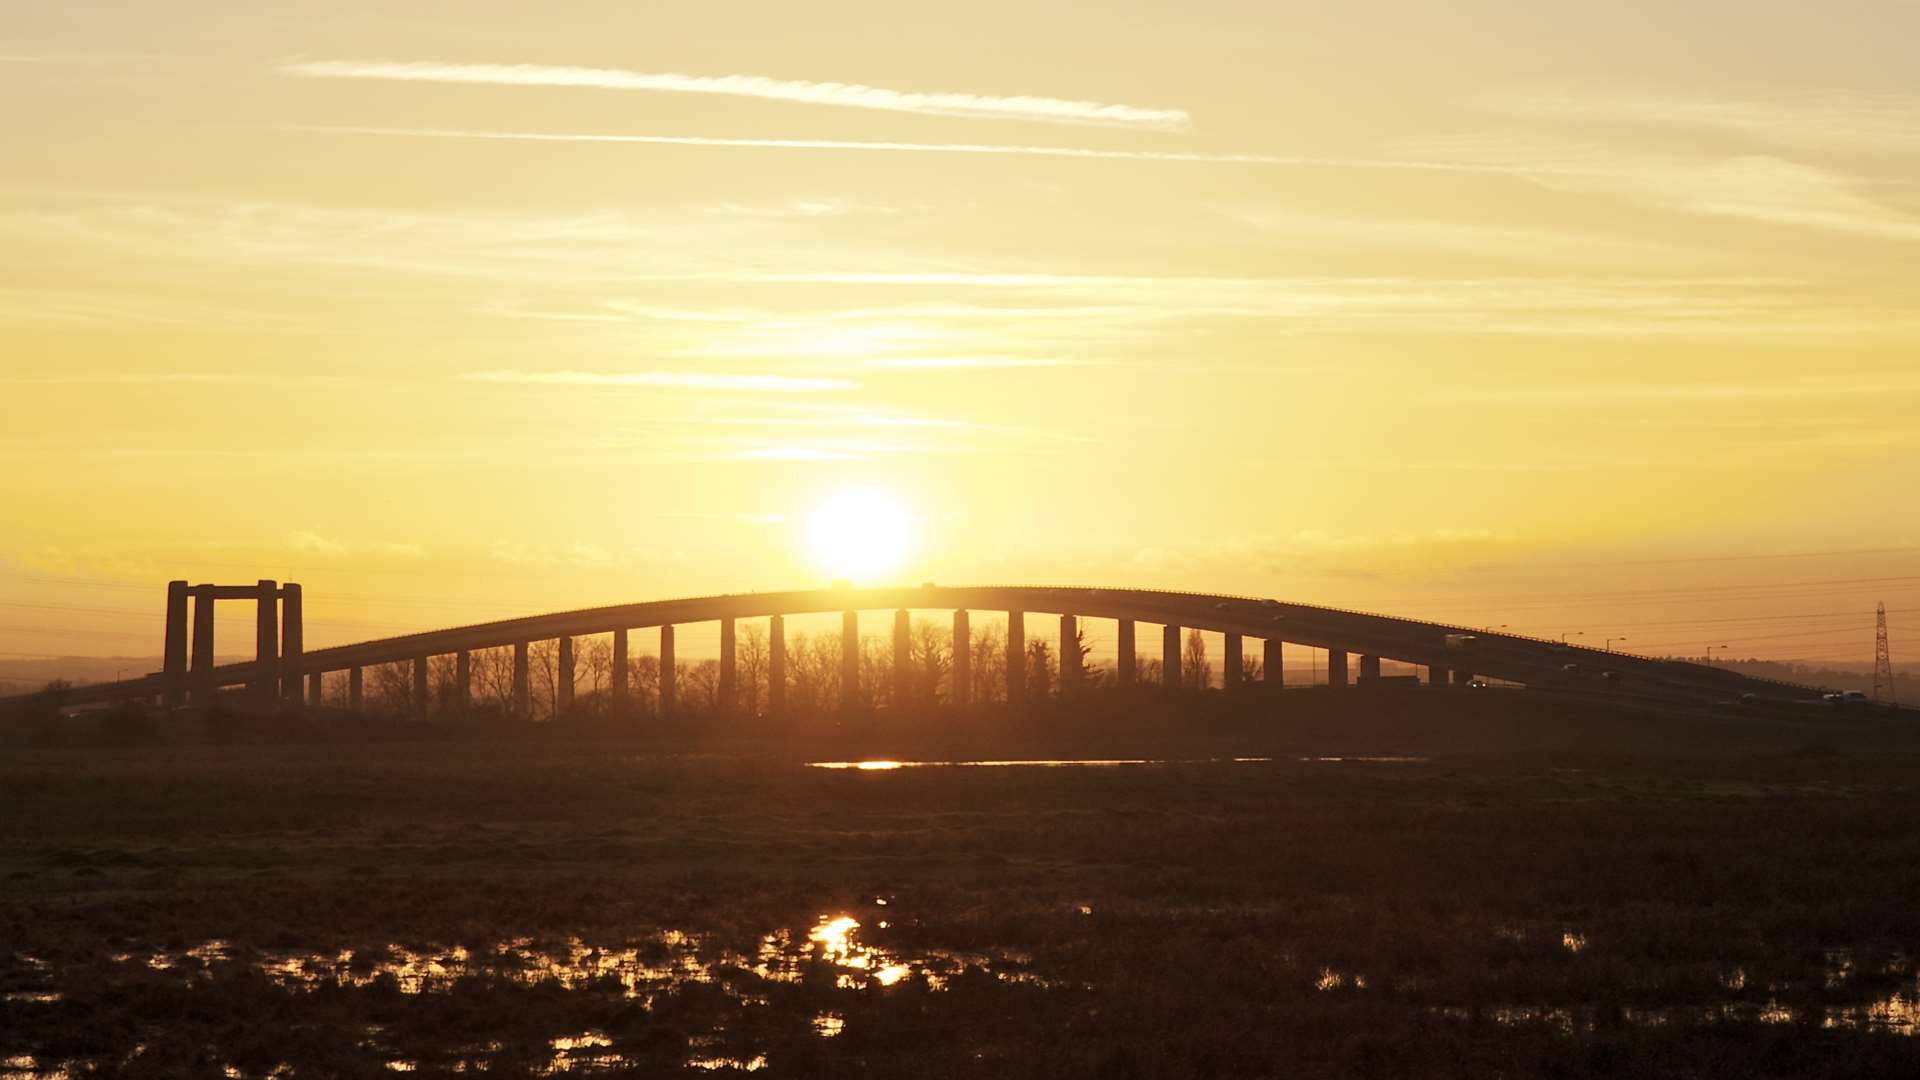 The Kingsferry Bridge and Sheppey Crossing at sunset